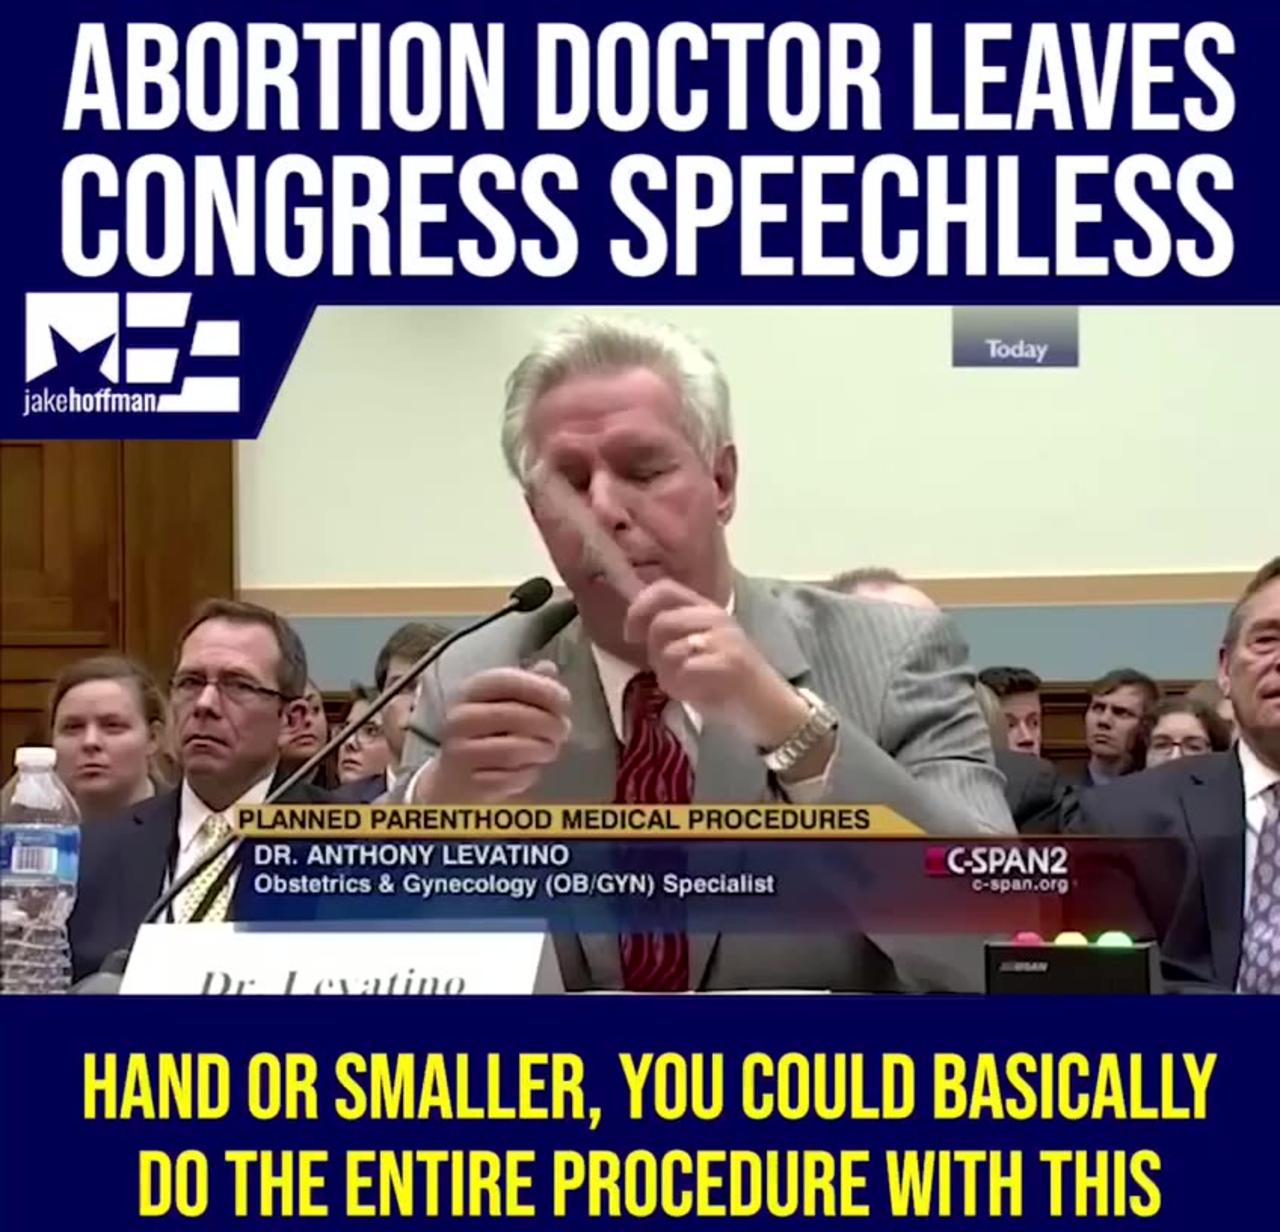 Performing an abortion means tearing a living fetus to pieces